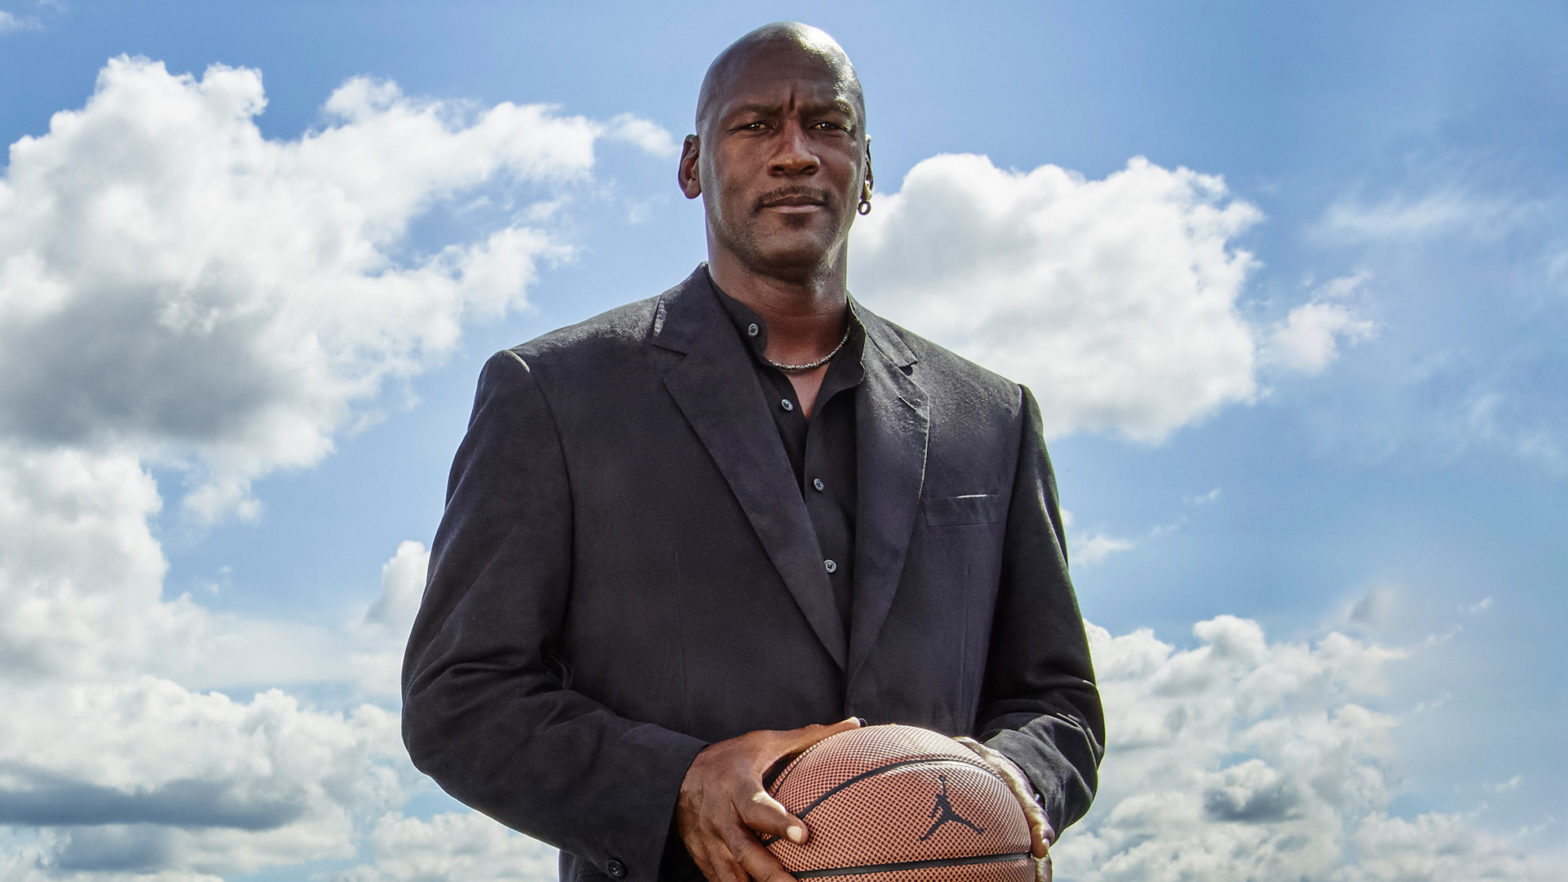 Michael Jordan Becomes The First Pro Athlete To Join America’s 400 Wealthiest People As Net Worth Soars To $3B